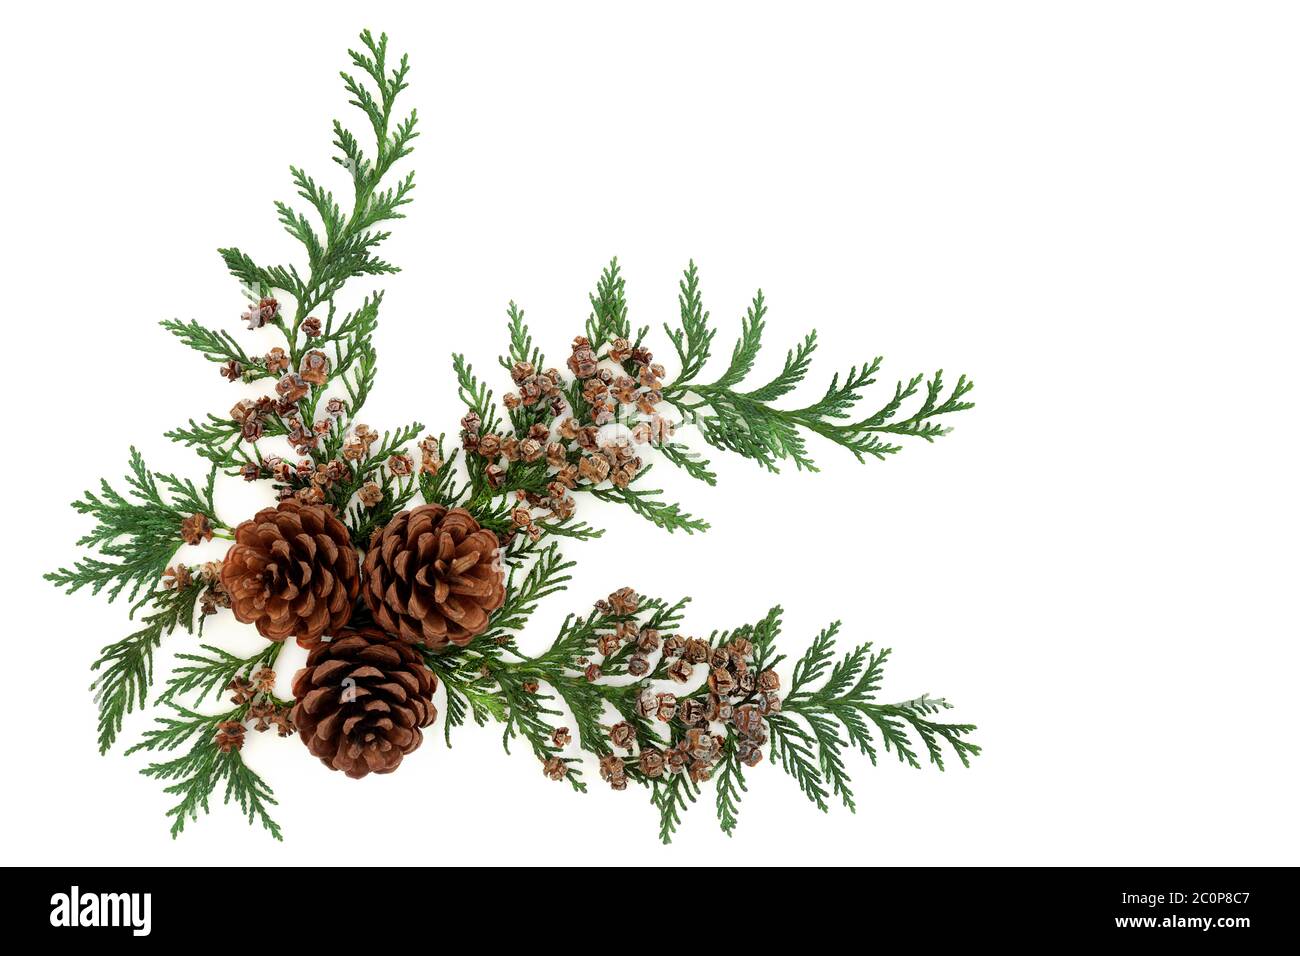 Natural winter greenery with flora & fauna of ivy, mistletoe, cedar  cypress, spruce fir, yew & pine cones. Nature study Stock Photo - Alamy